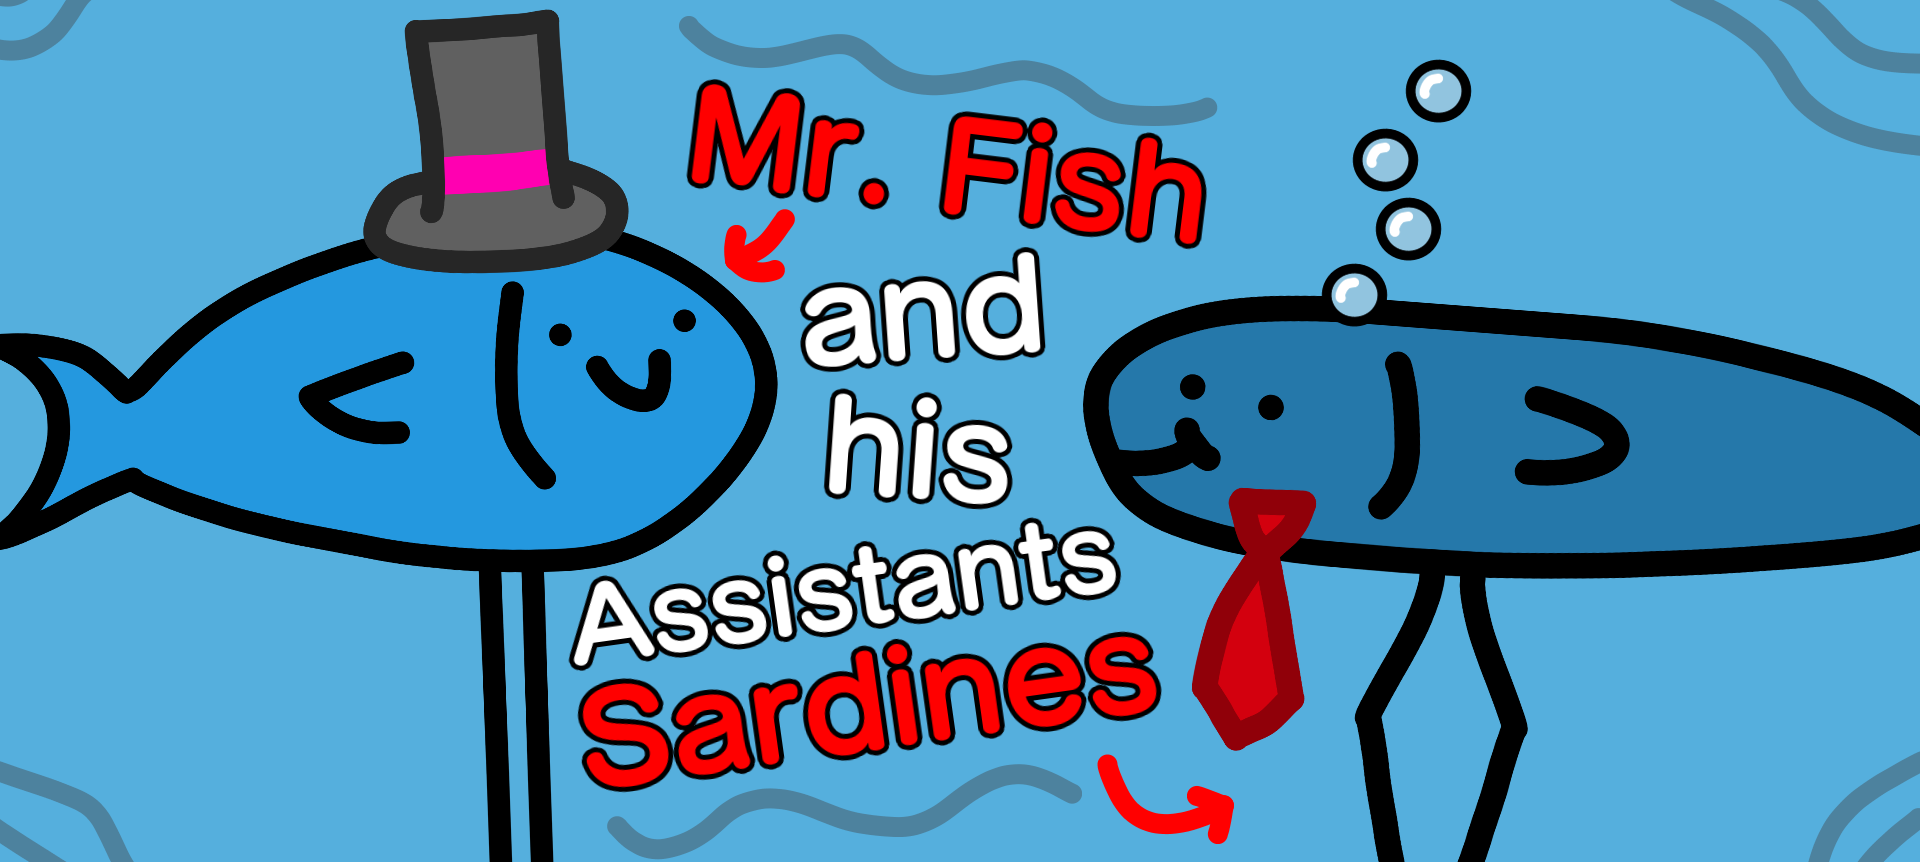 Mr. Fish and his Assistants Sardines